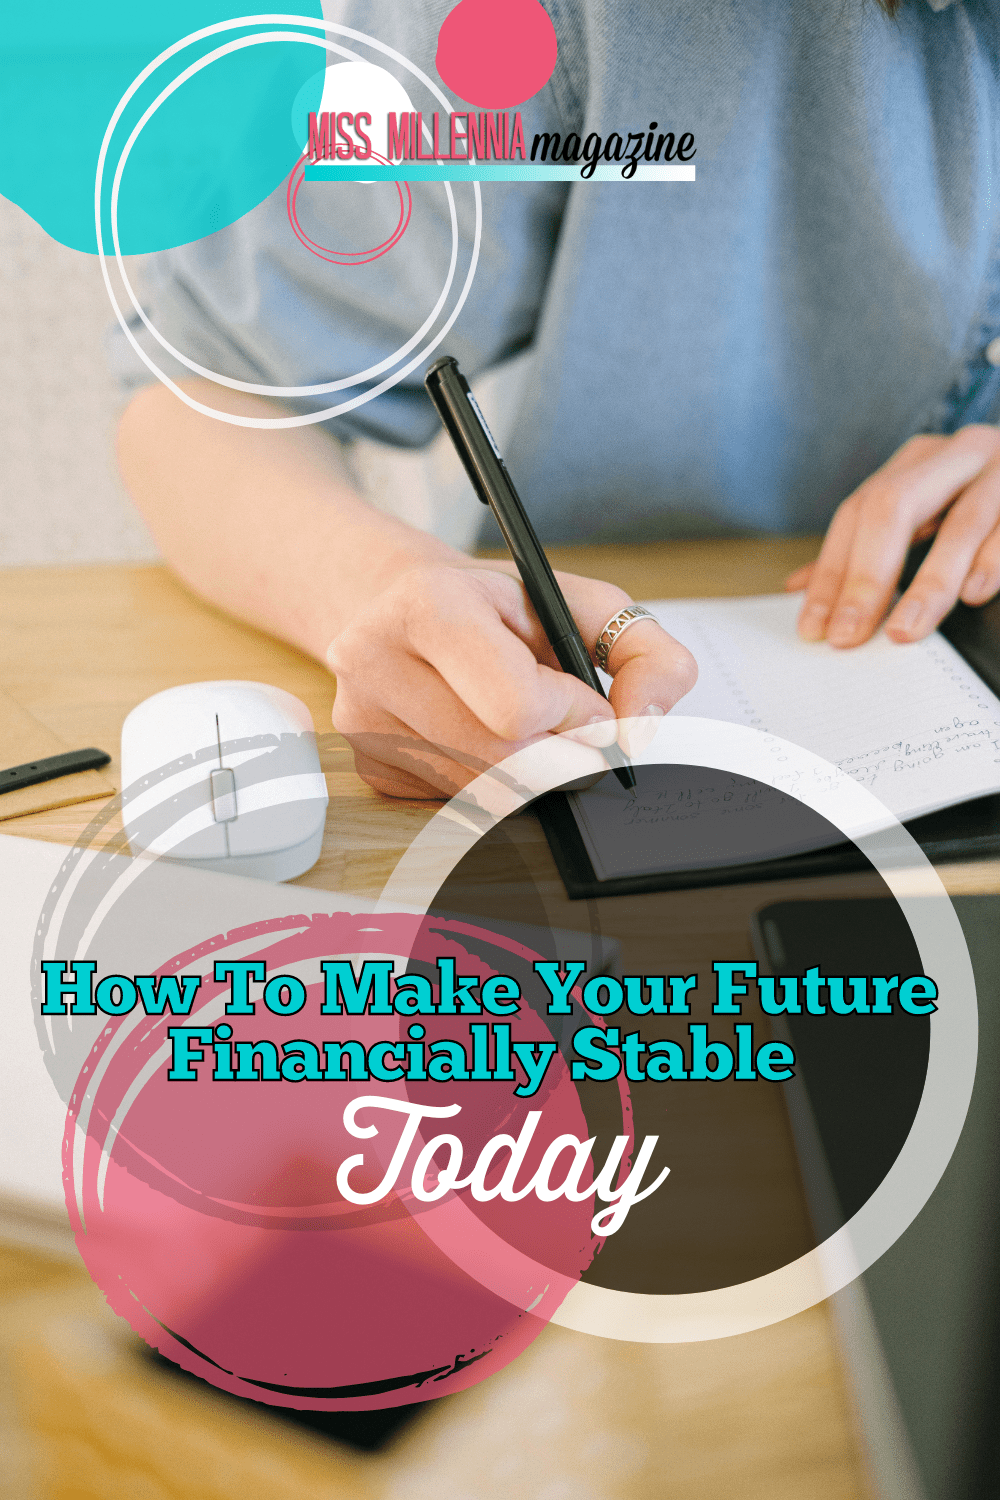 How To Make Your Future Financially Stable Today